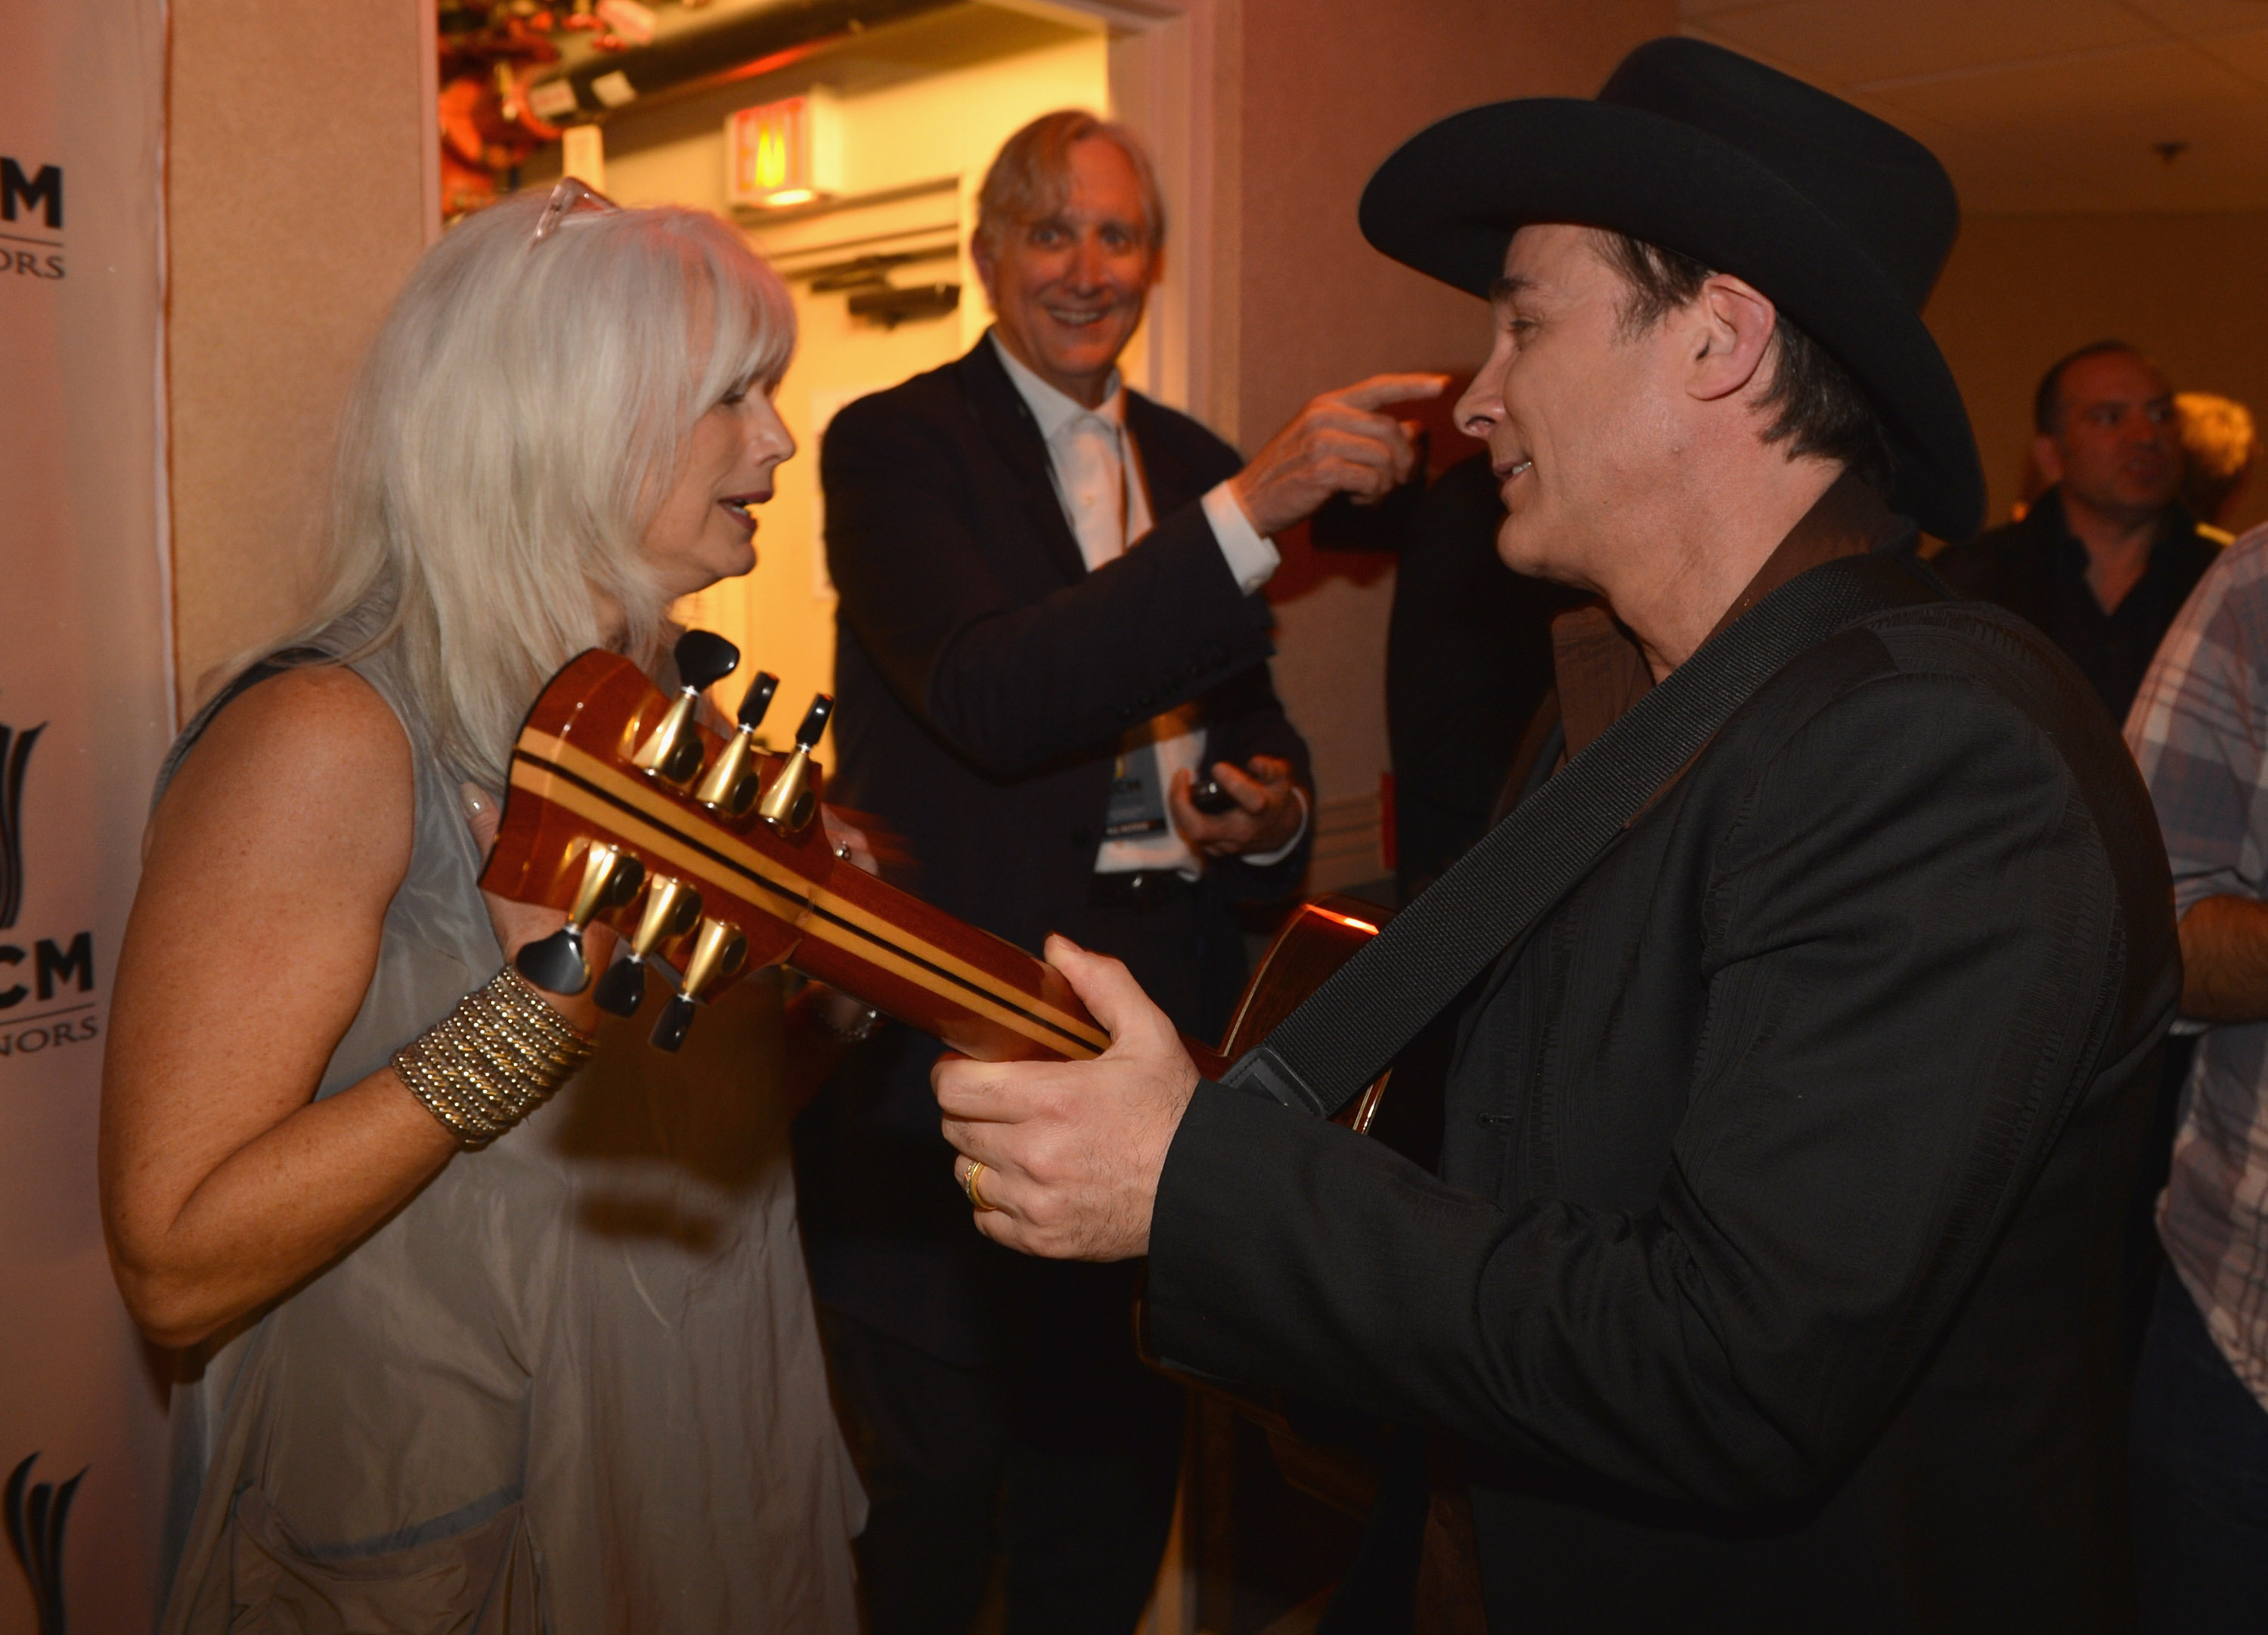 (L-R) Emmylou Harris, T Bone Burnett, and Clint Black at the 6th Annual ACM Honors (Photo by Rick Diamond/Getty Images for ACM)